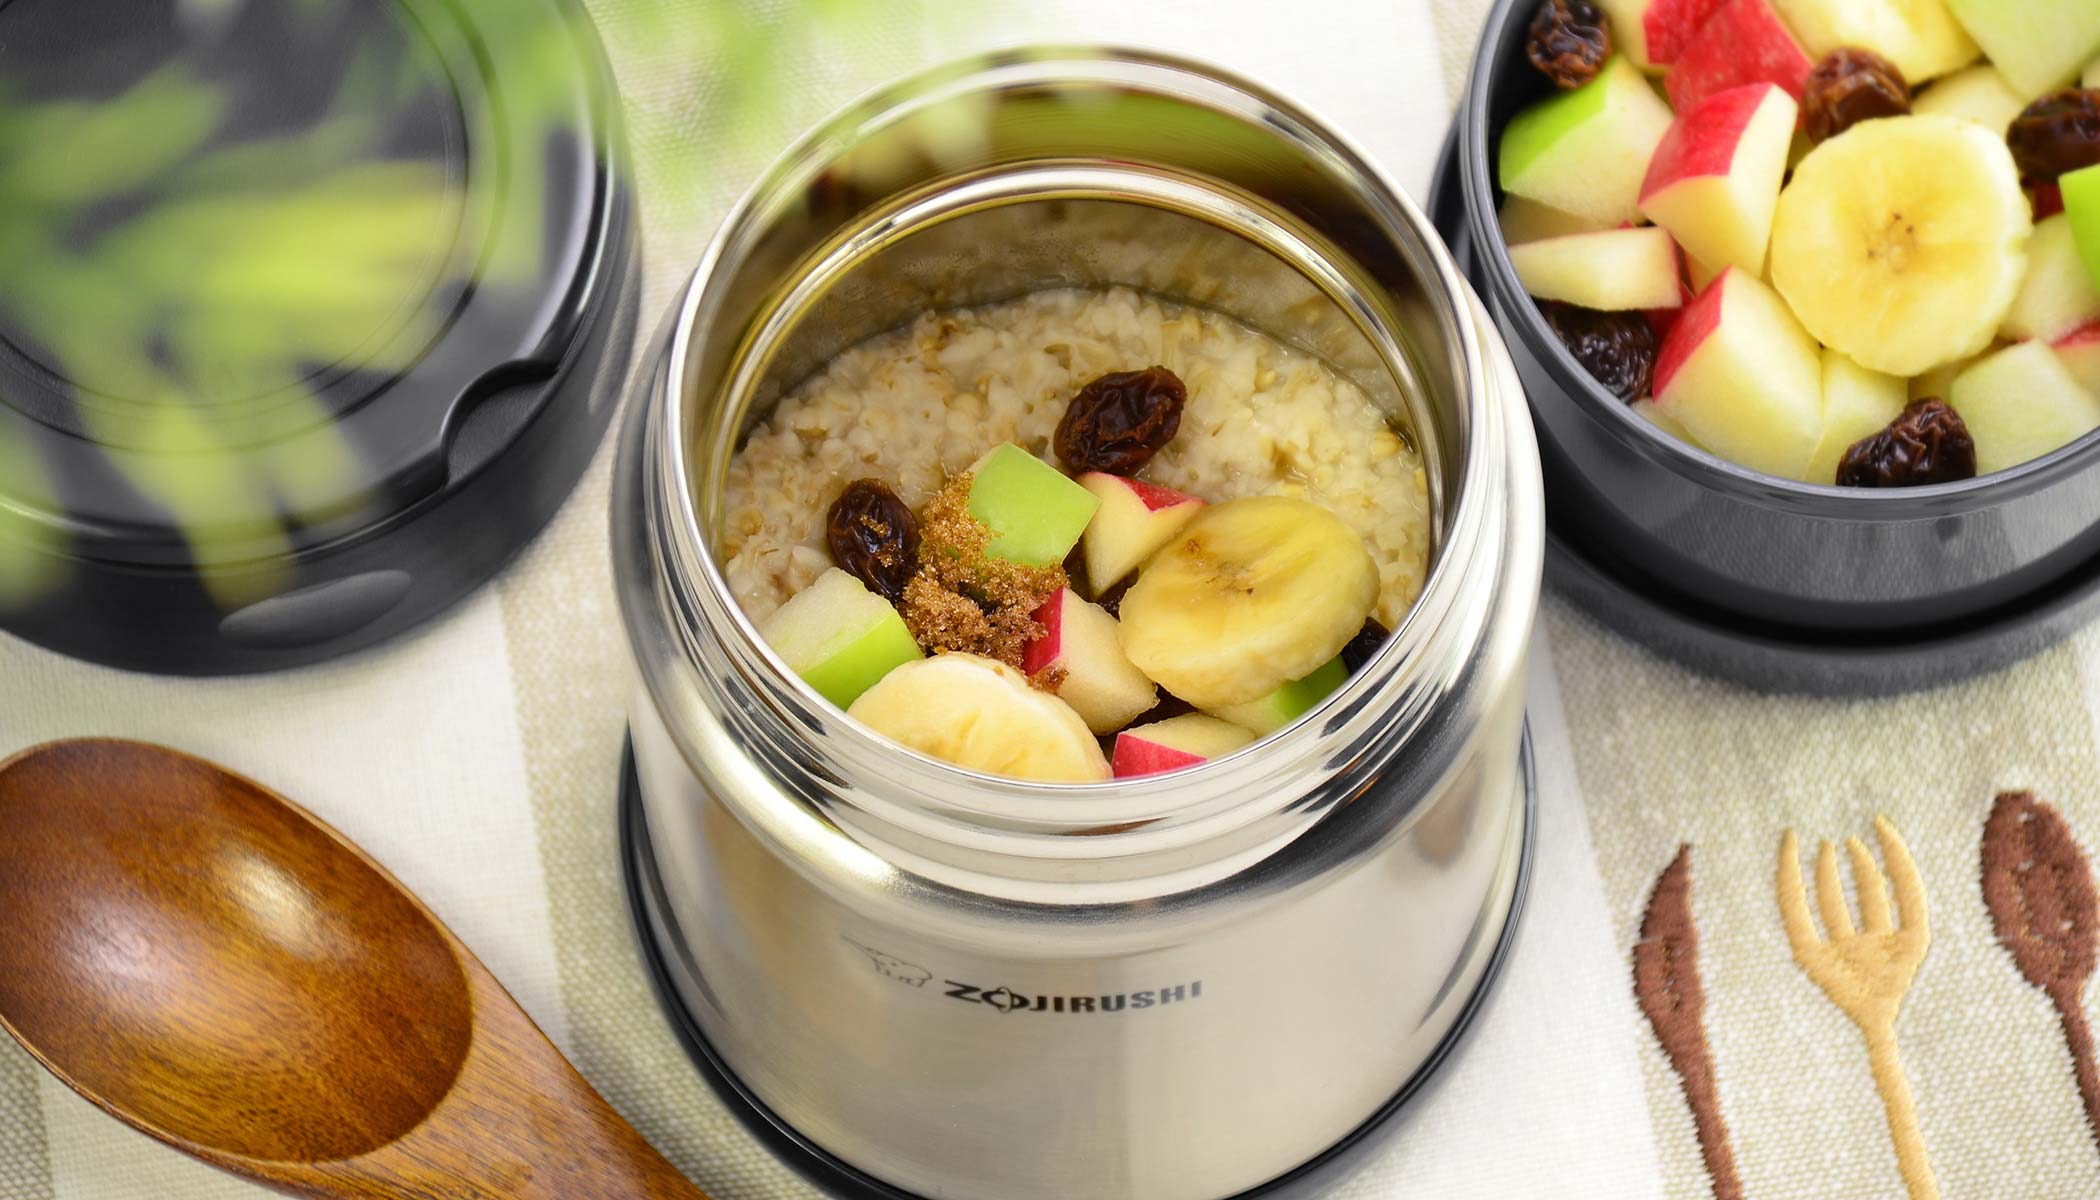 Steel Cut Oatmeal To-Go in Your Food 